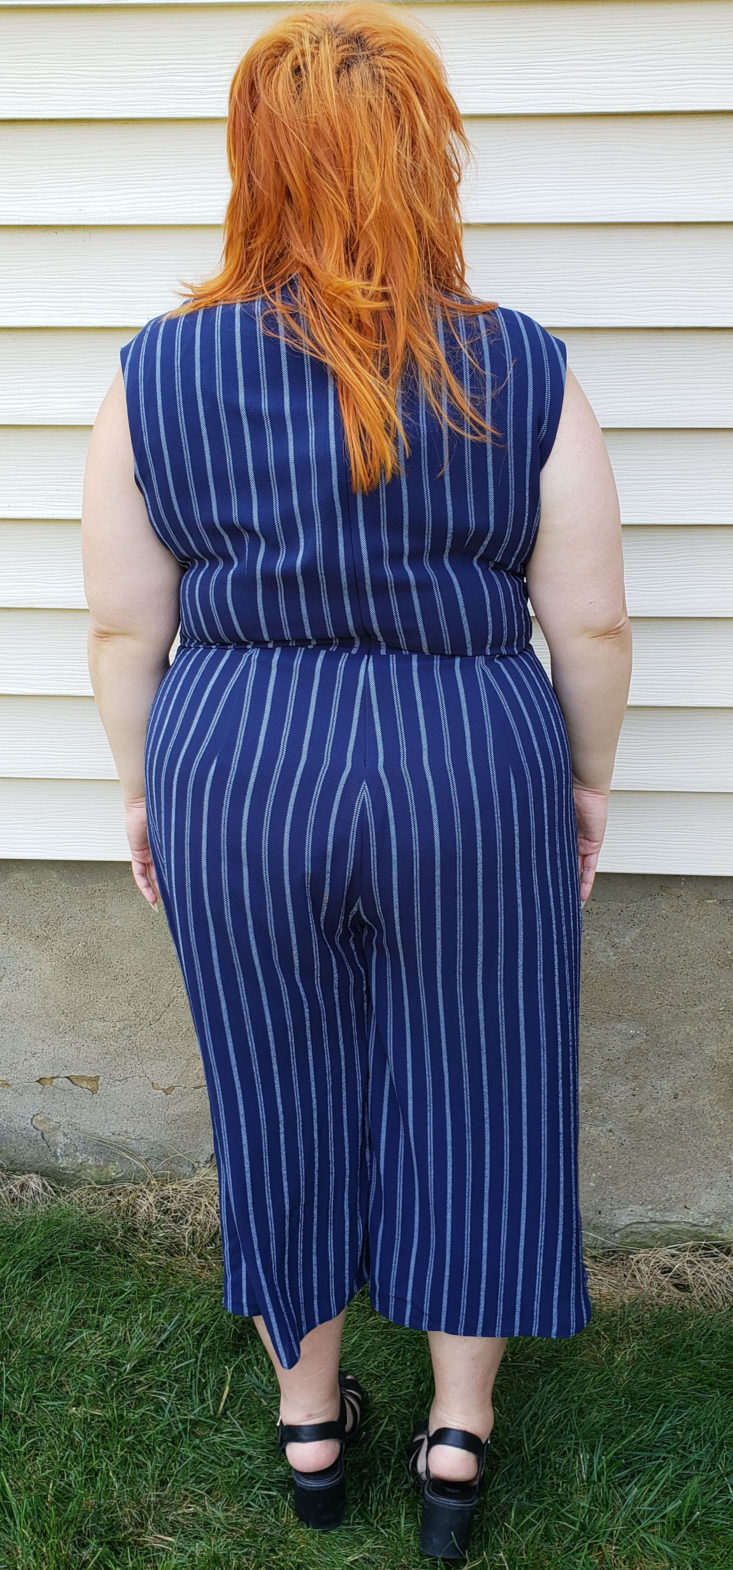 Gwynnie Bee Box July 2019 - Navy Rope Stripe Wide Leg Jumpsuit by Maggy London 5